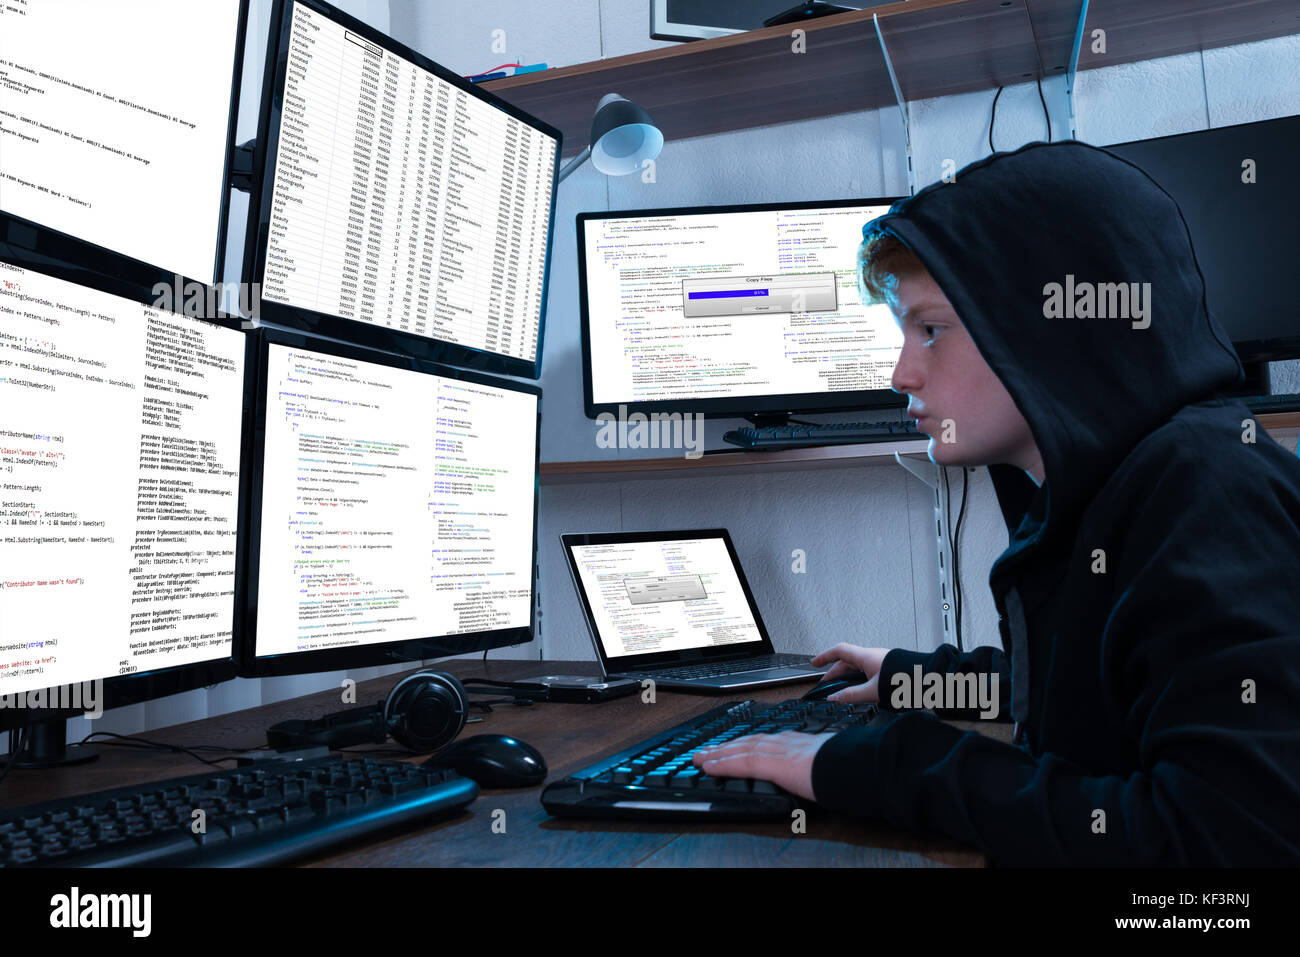 Boy Programming On Computer With Multiple Monitors And Laptop On Desk Stock Photo